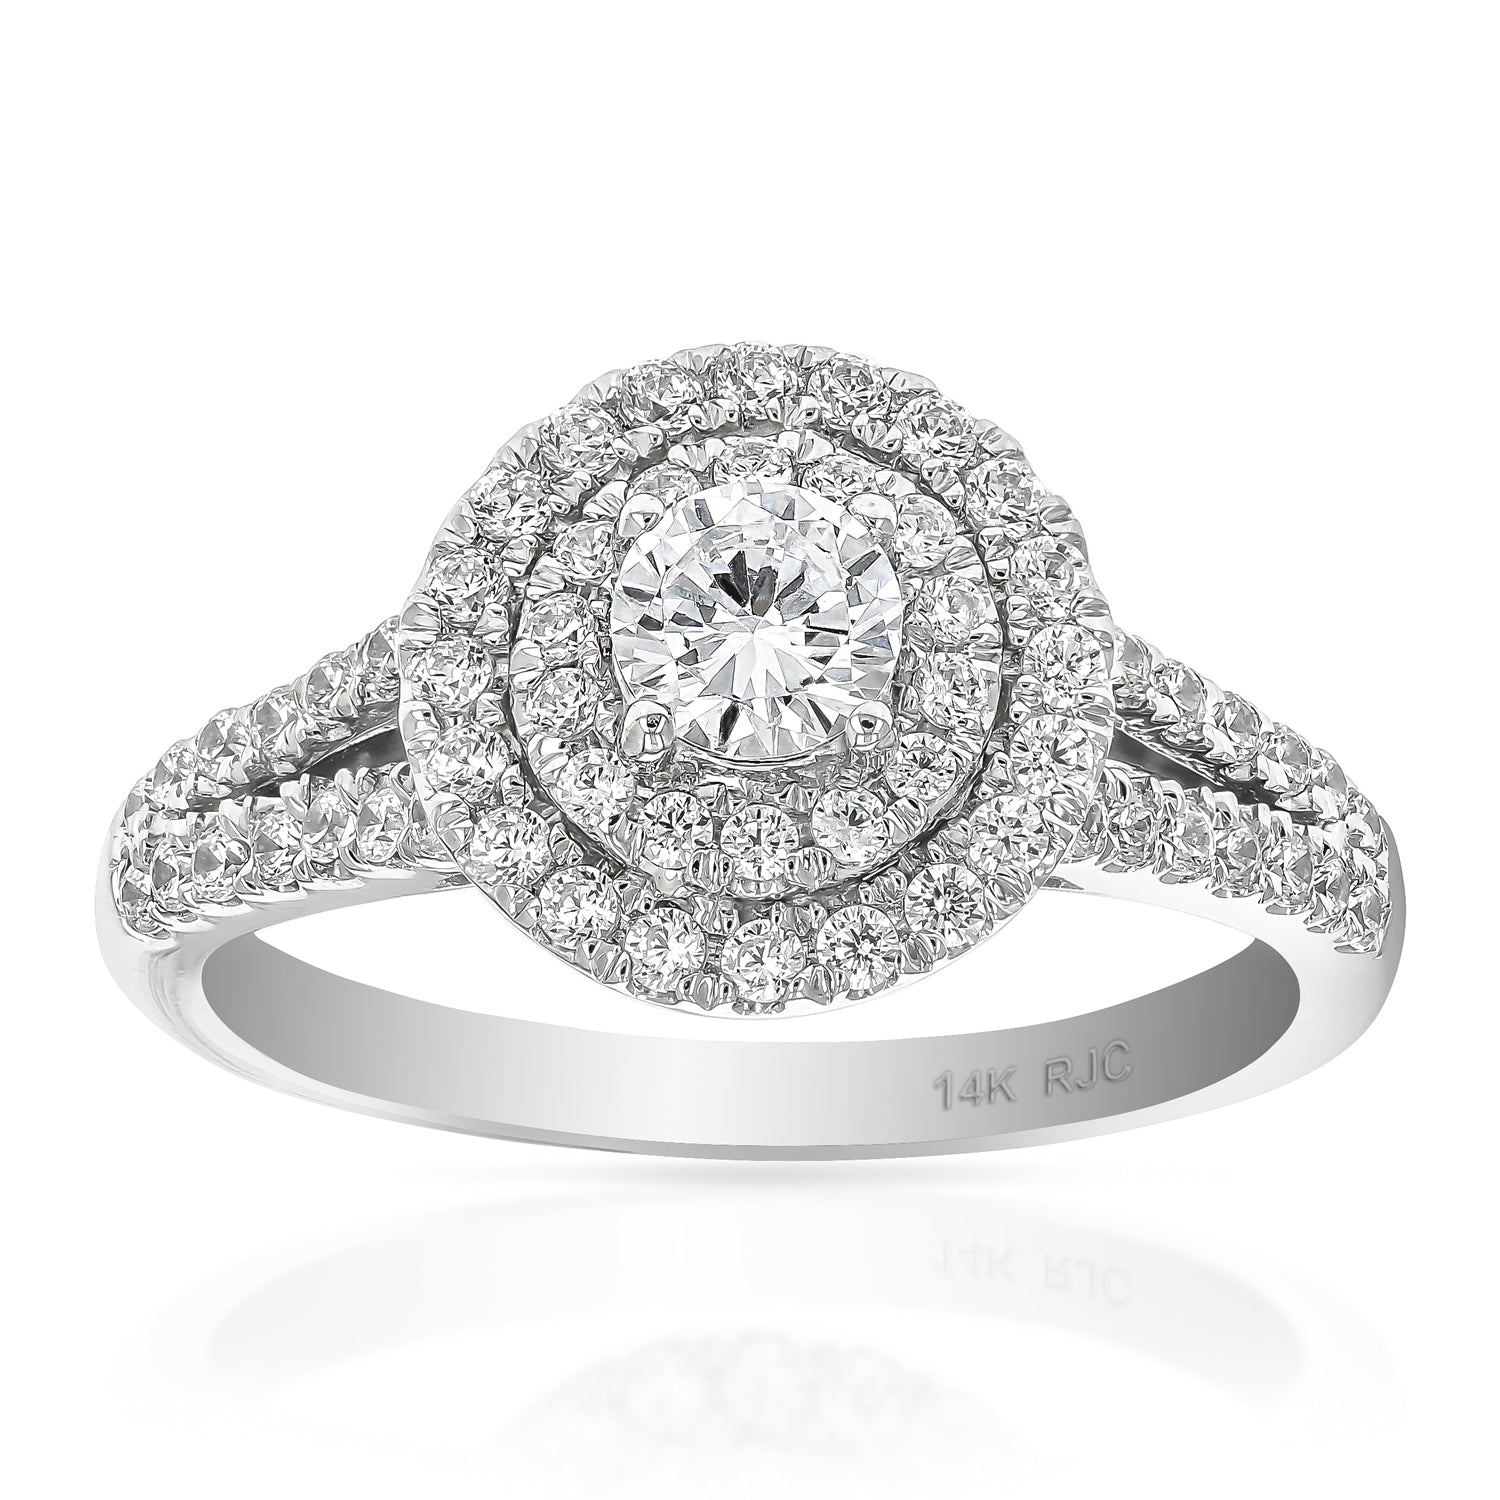 1 cttw 14k White Gold Diamond Ring Bridal Style With Double Round Frame Halo